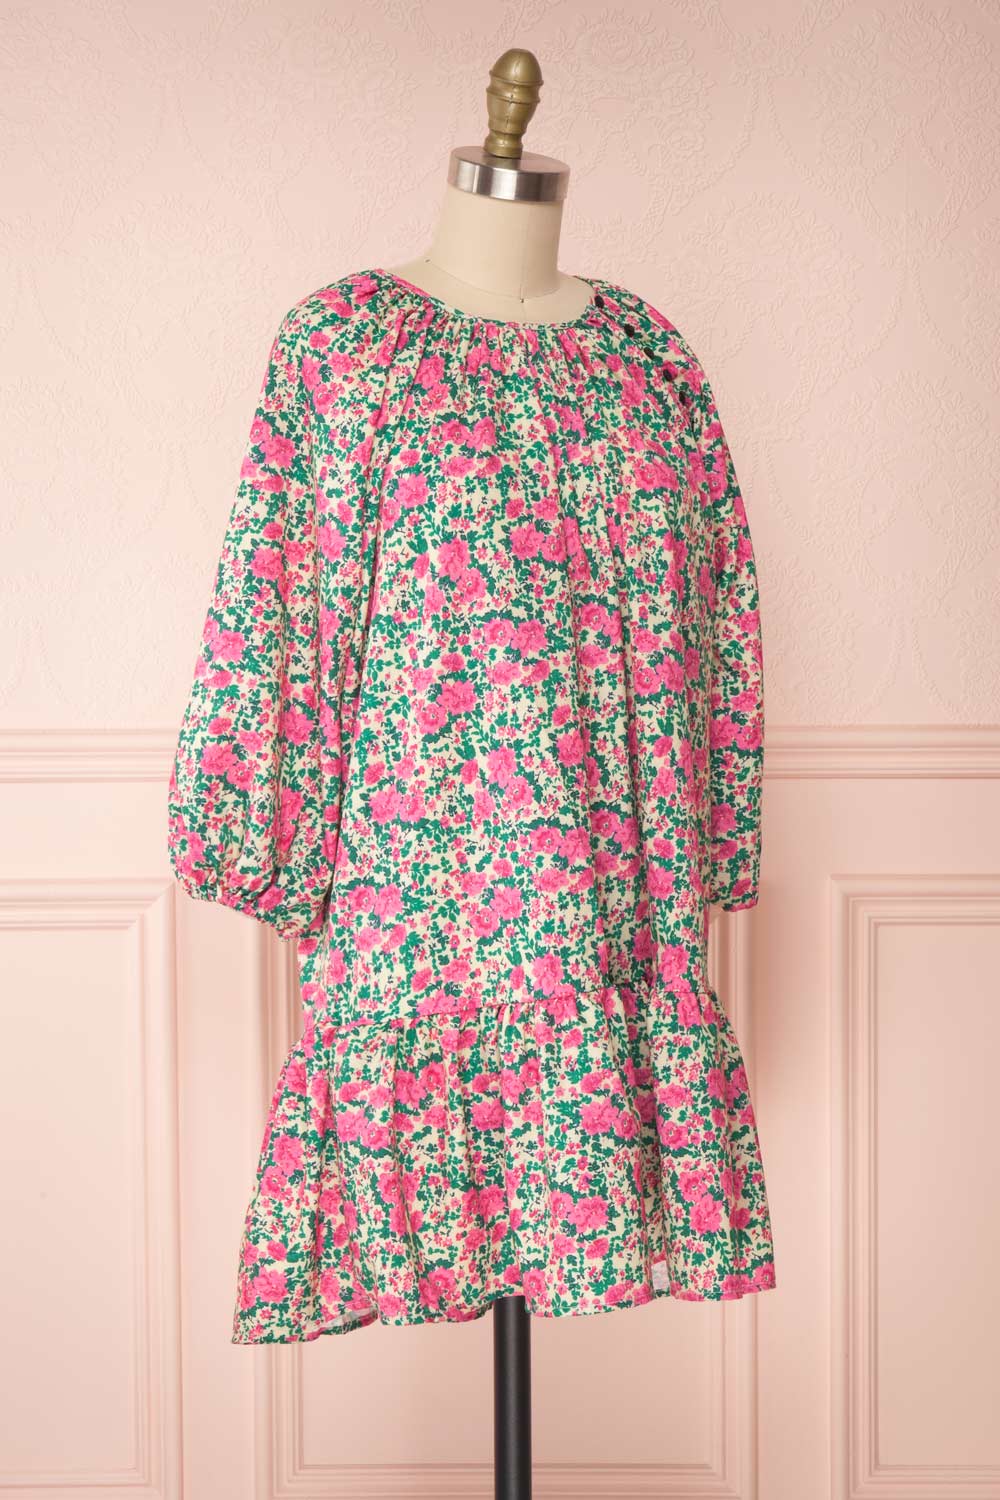 Oxomoco Pink & Green Floral Short Dress | Boutique 1861 side view